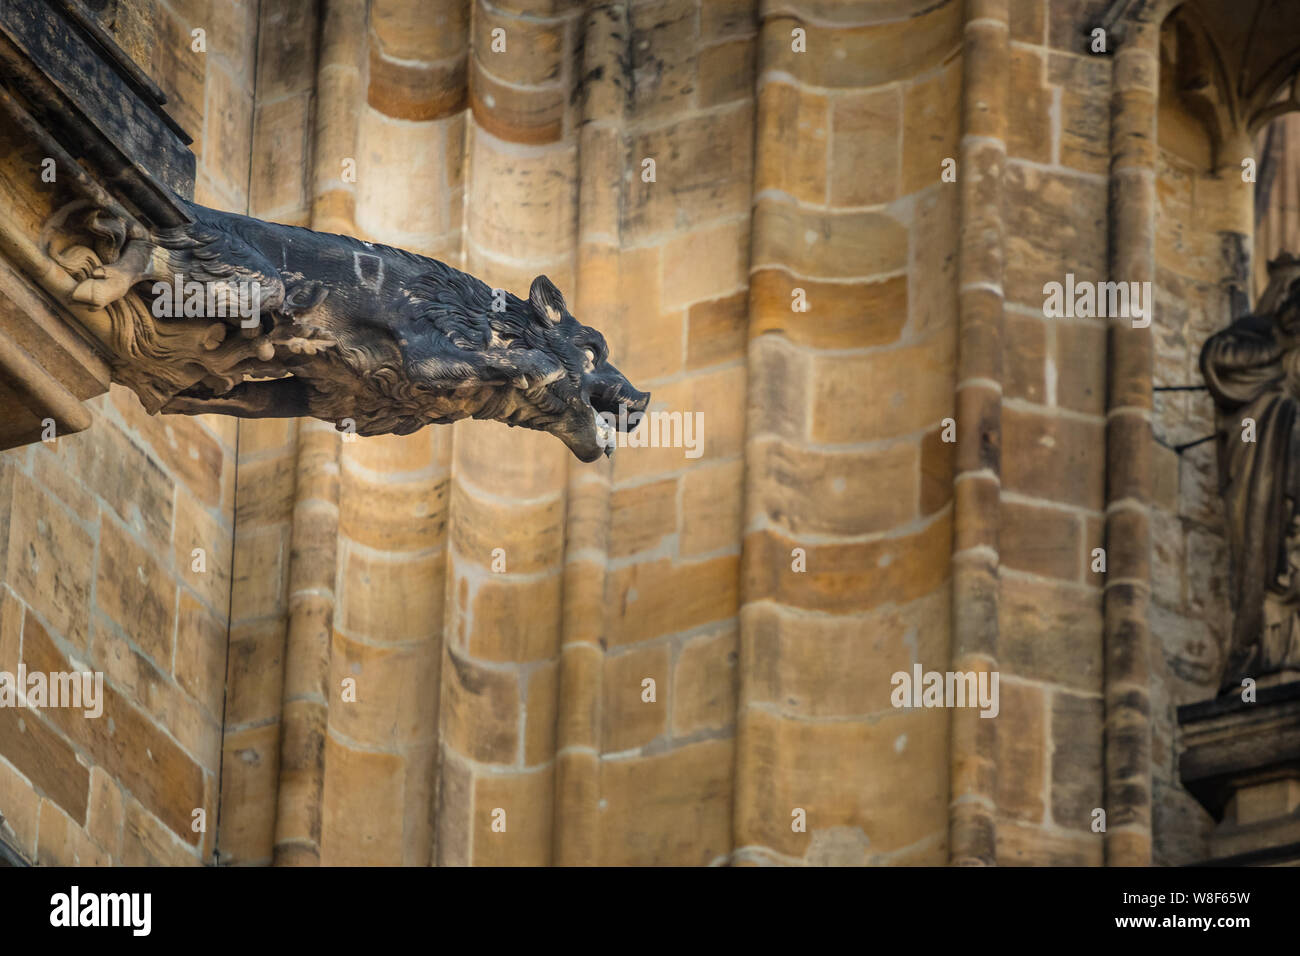 One of gargoyles of St. Vitus cathedral in Prague Stock Photo